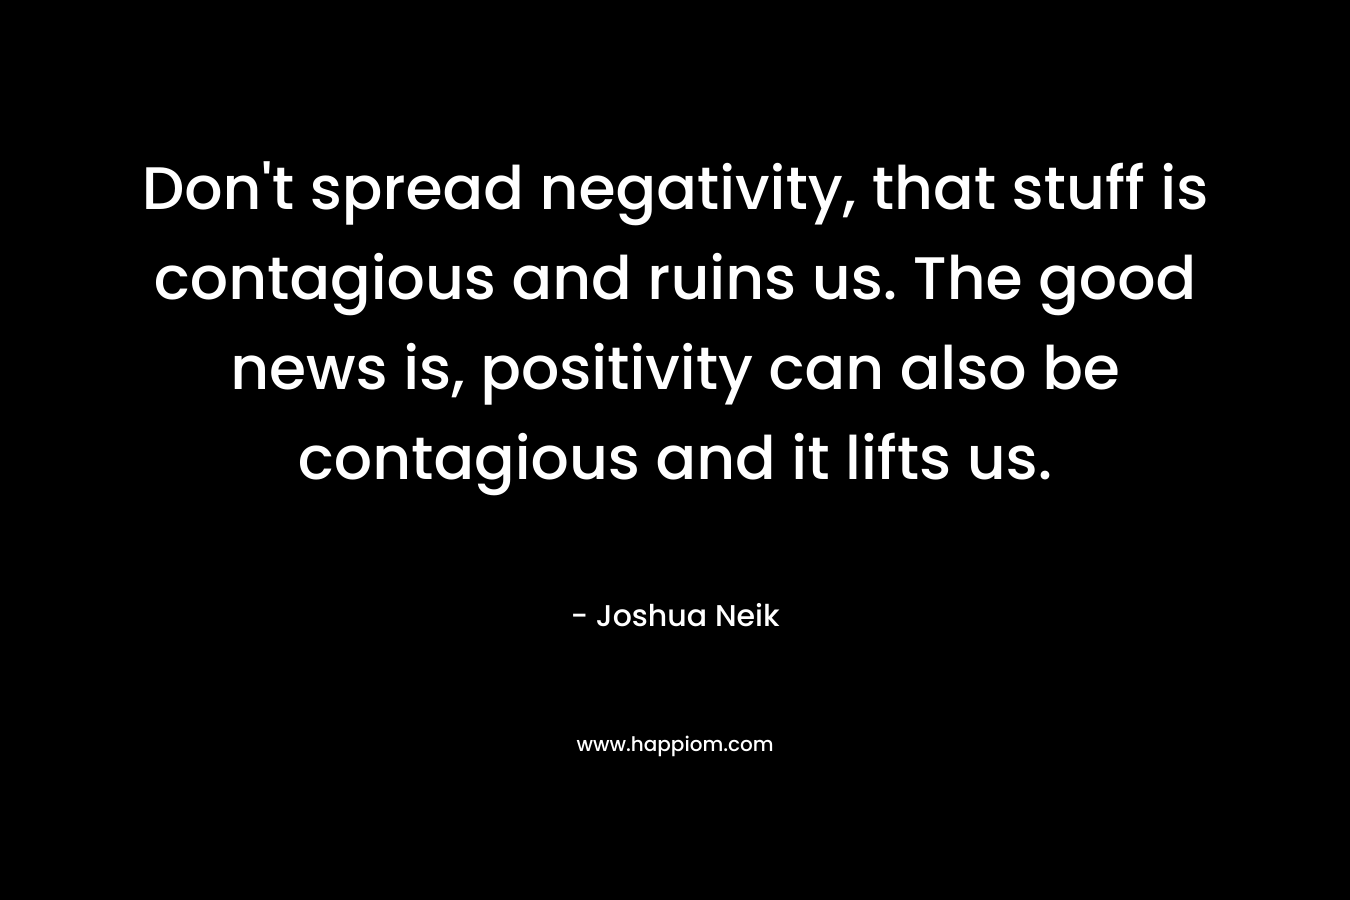 Don’t spread negativity, that stuff is contagious and ruins us. The good news is, positivity can also be contagious and it lifts us. – Joshua Neik